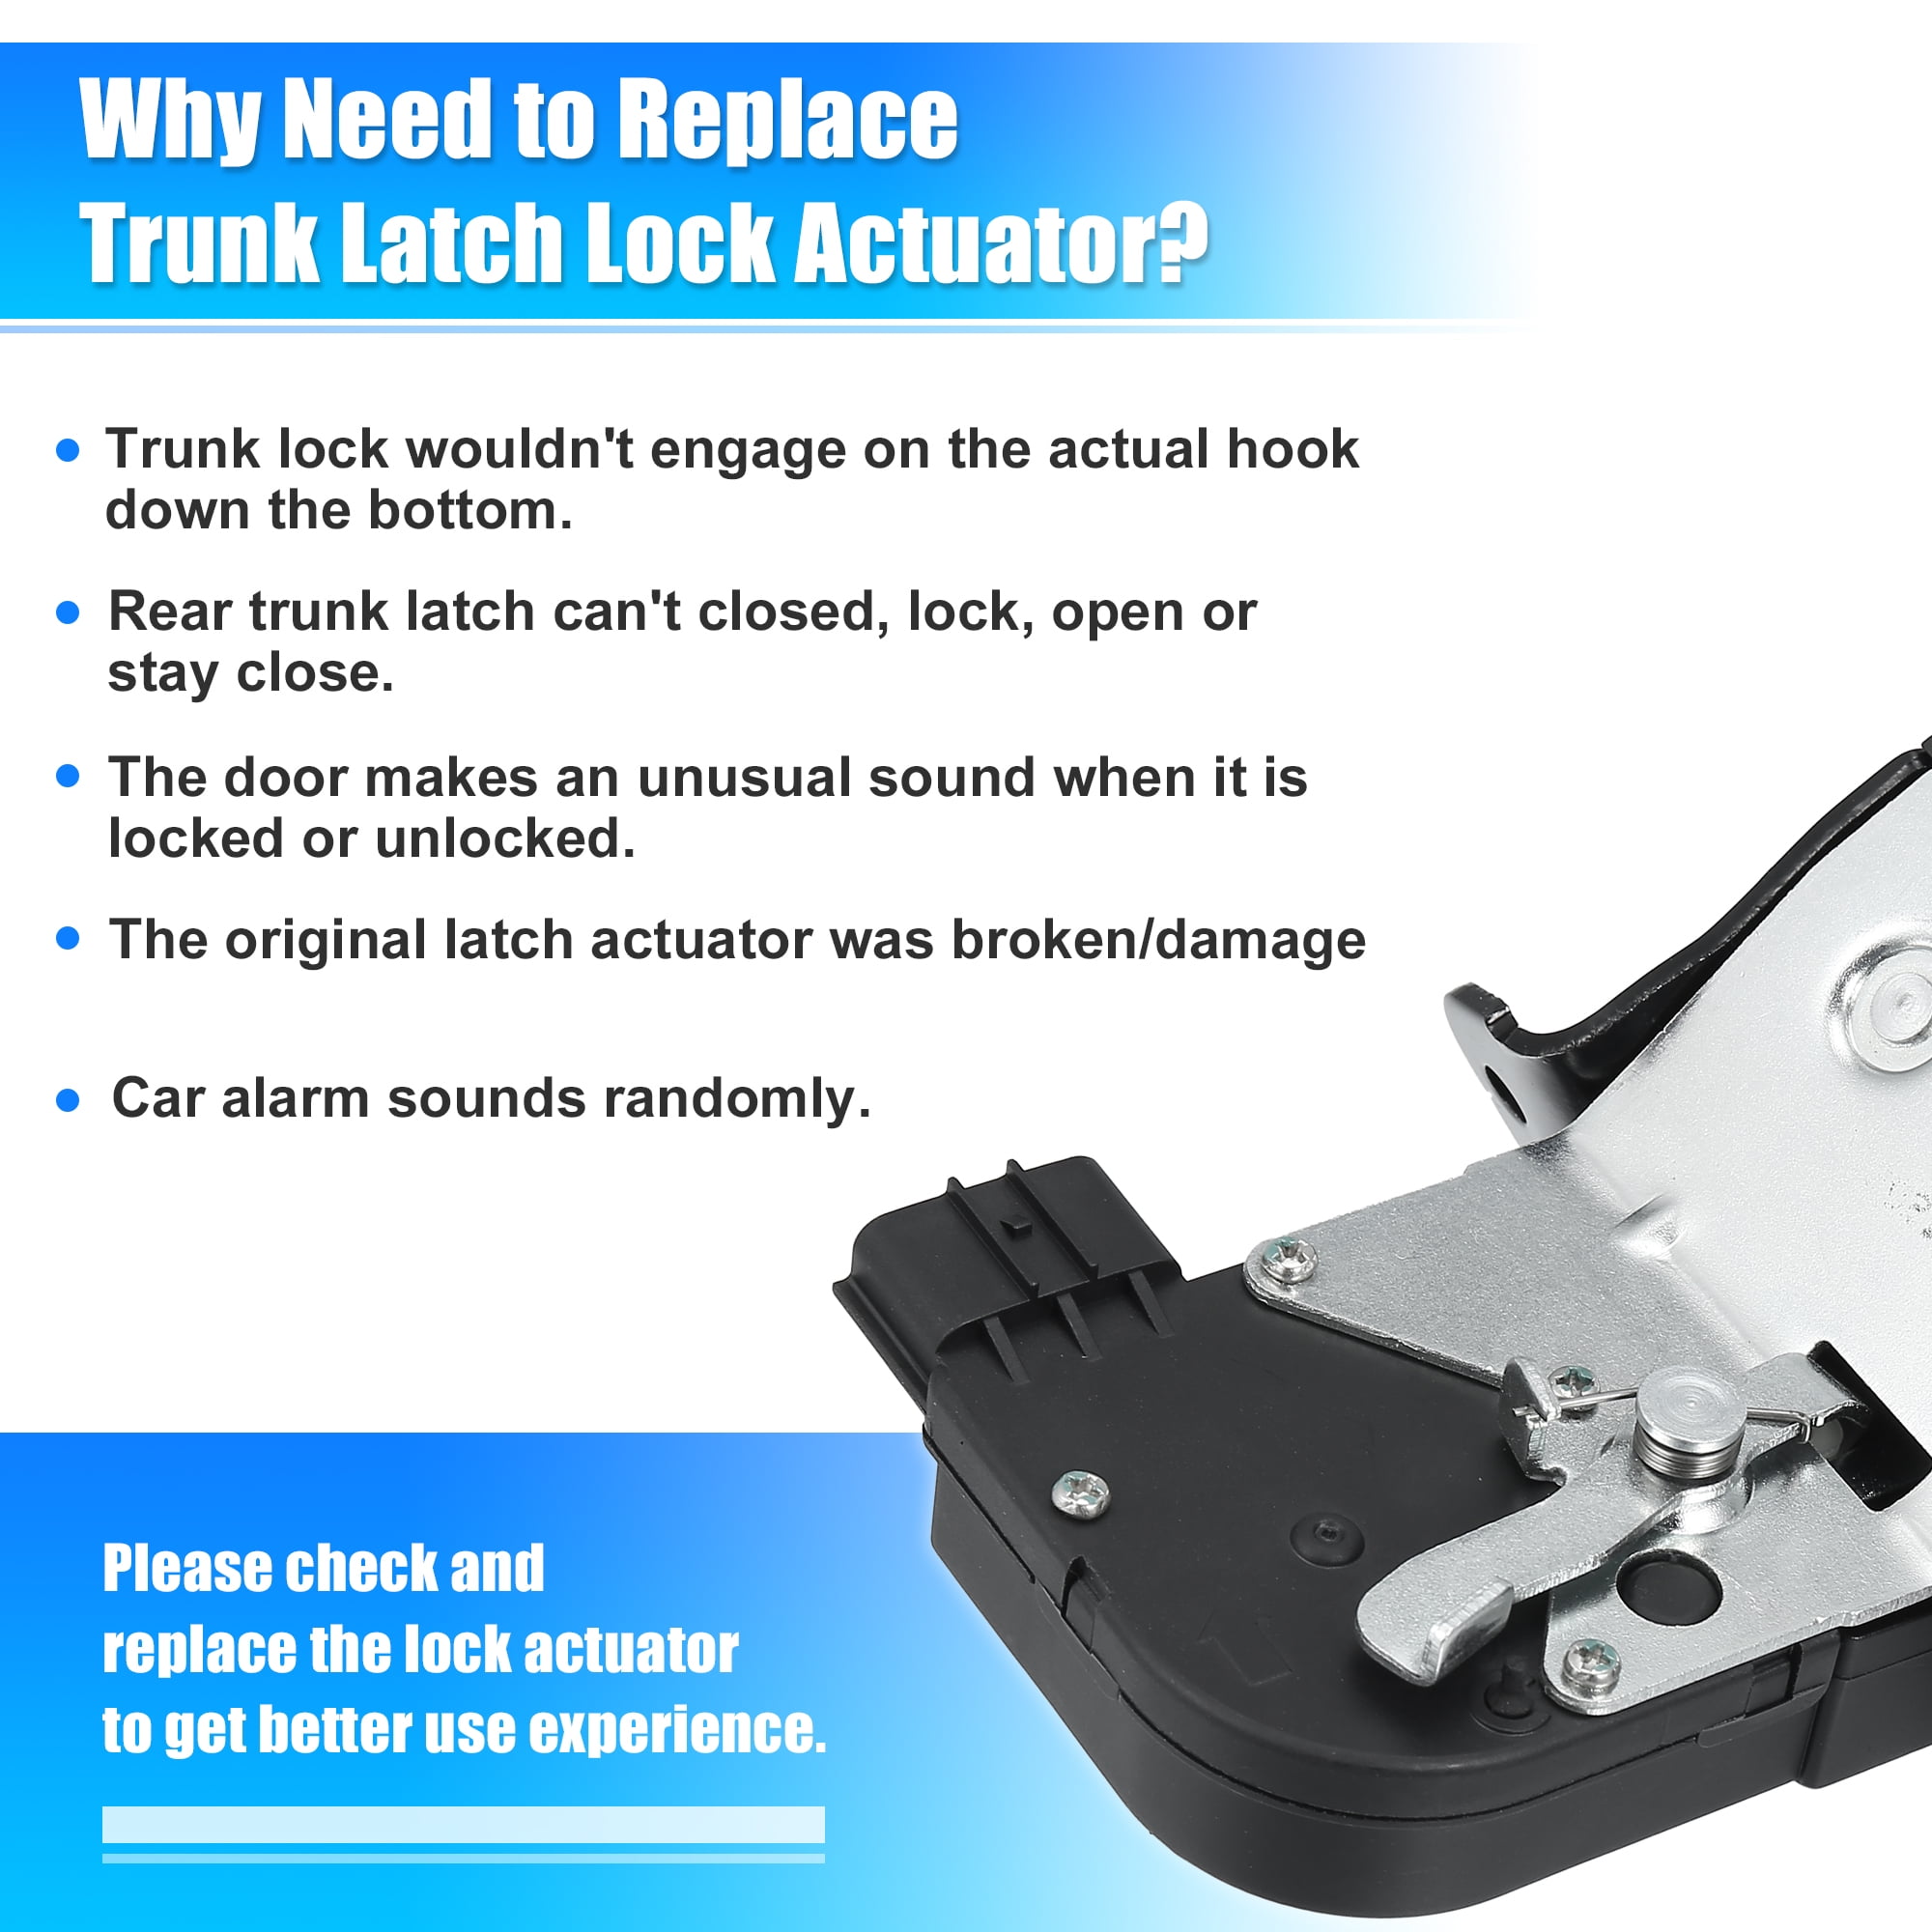 How to Replace a Trunk Lock Actuator